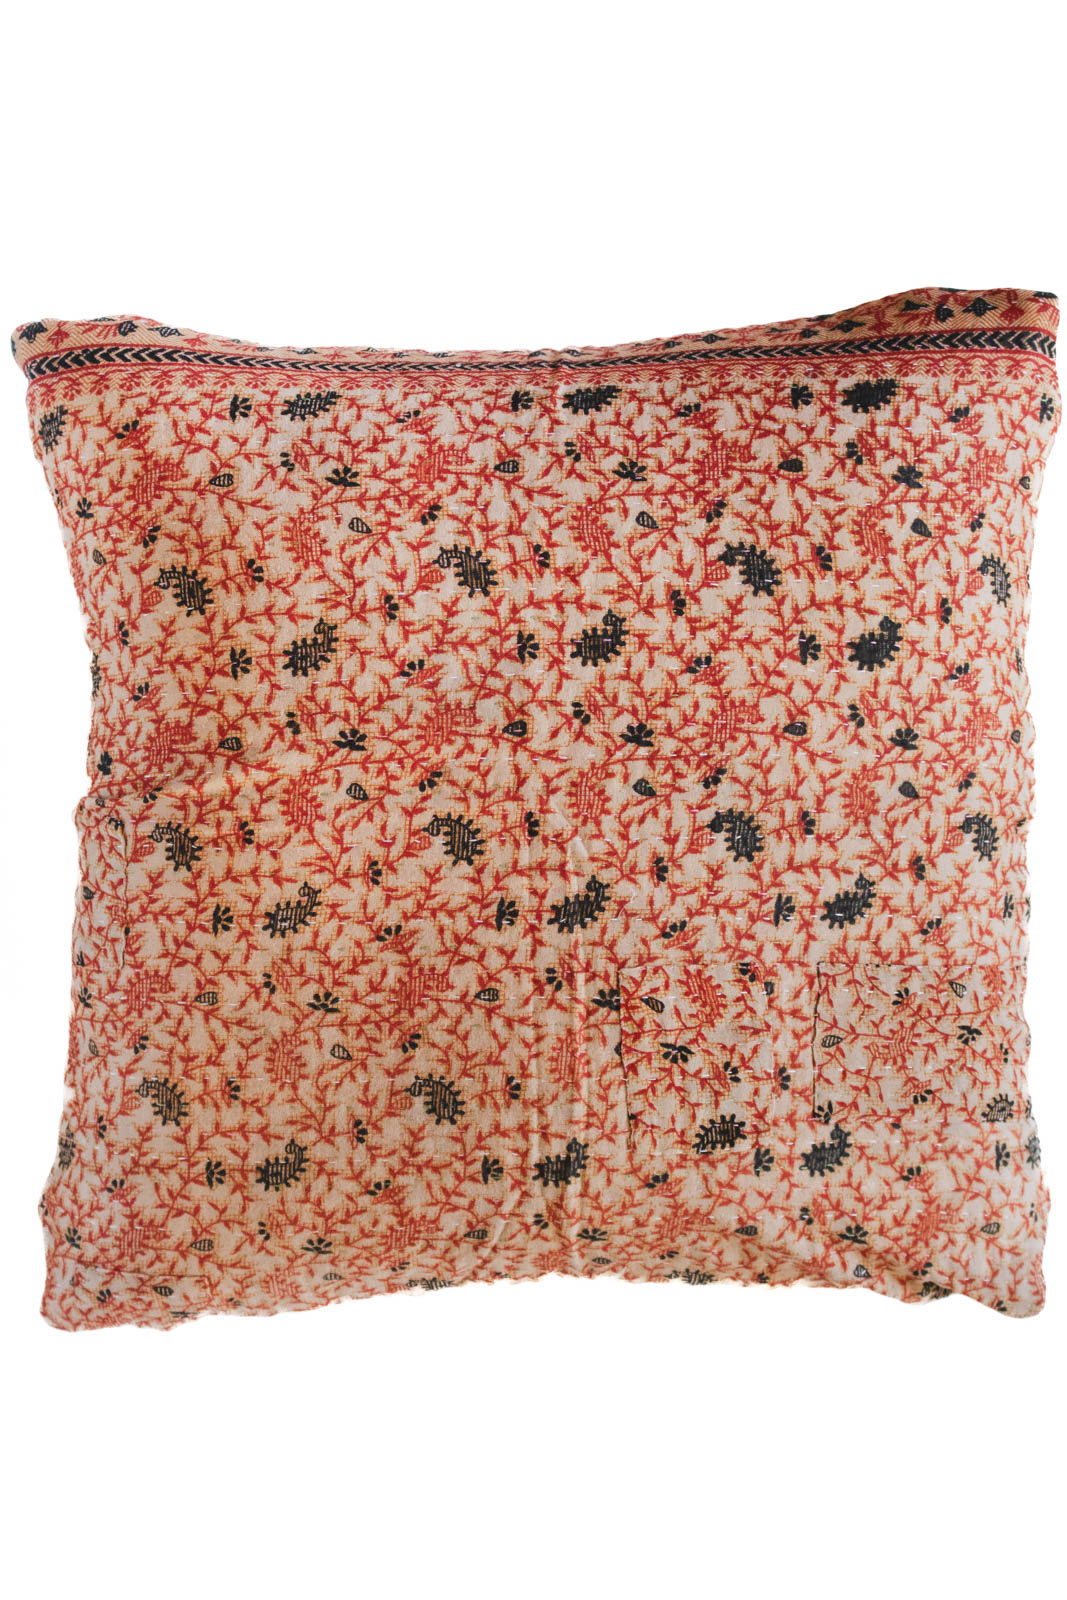 Worthy no. 4 Kantha Pillow Cover